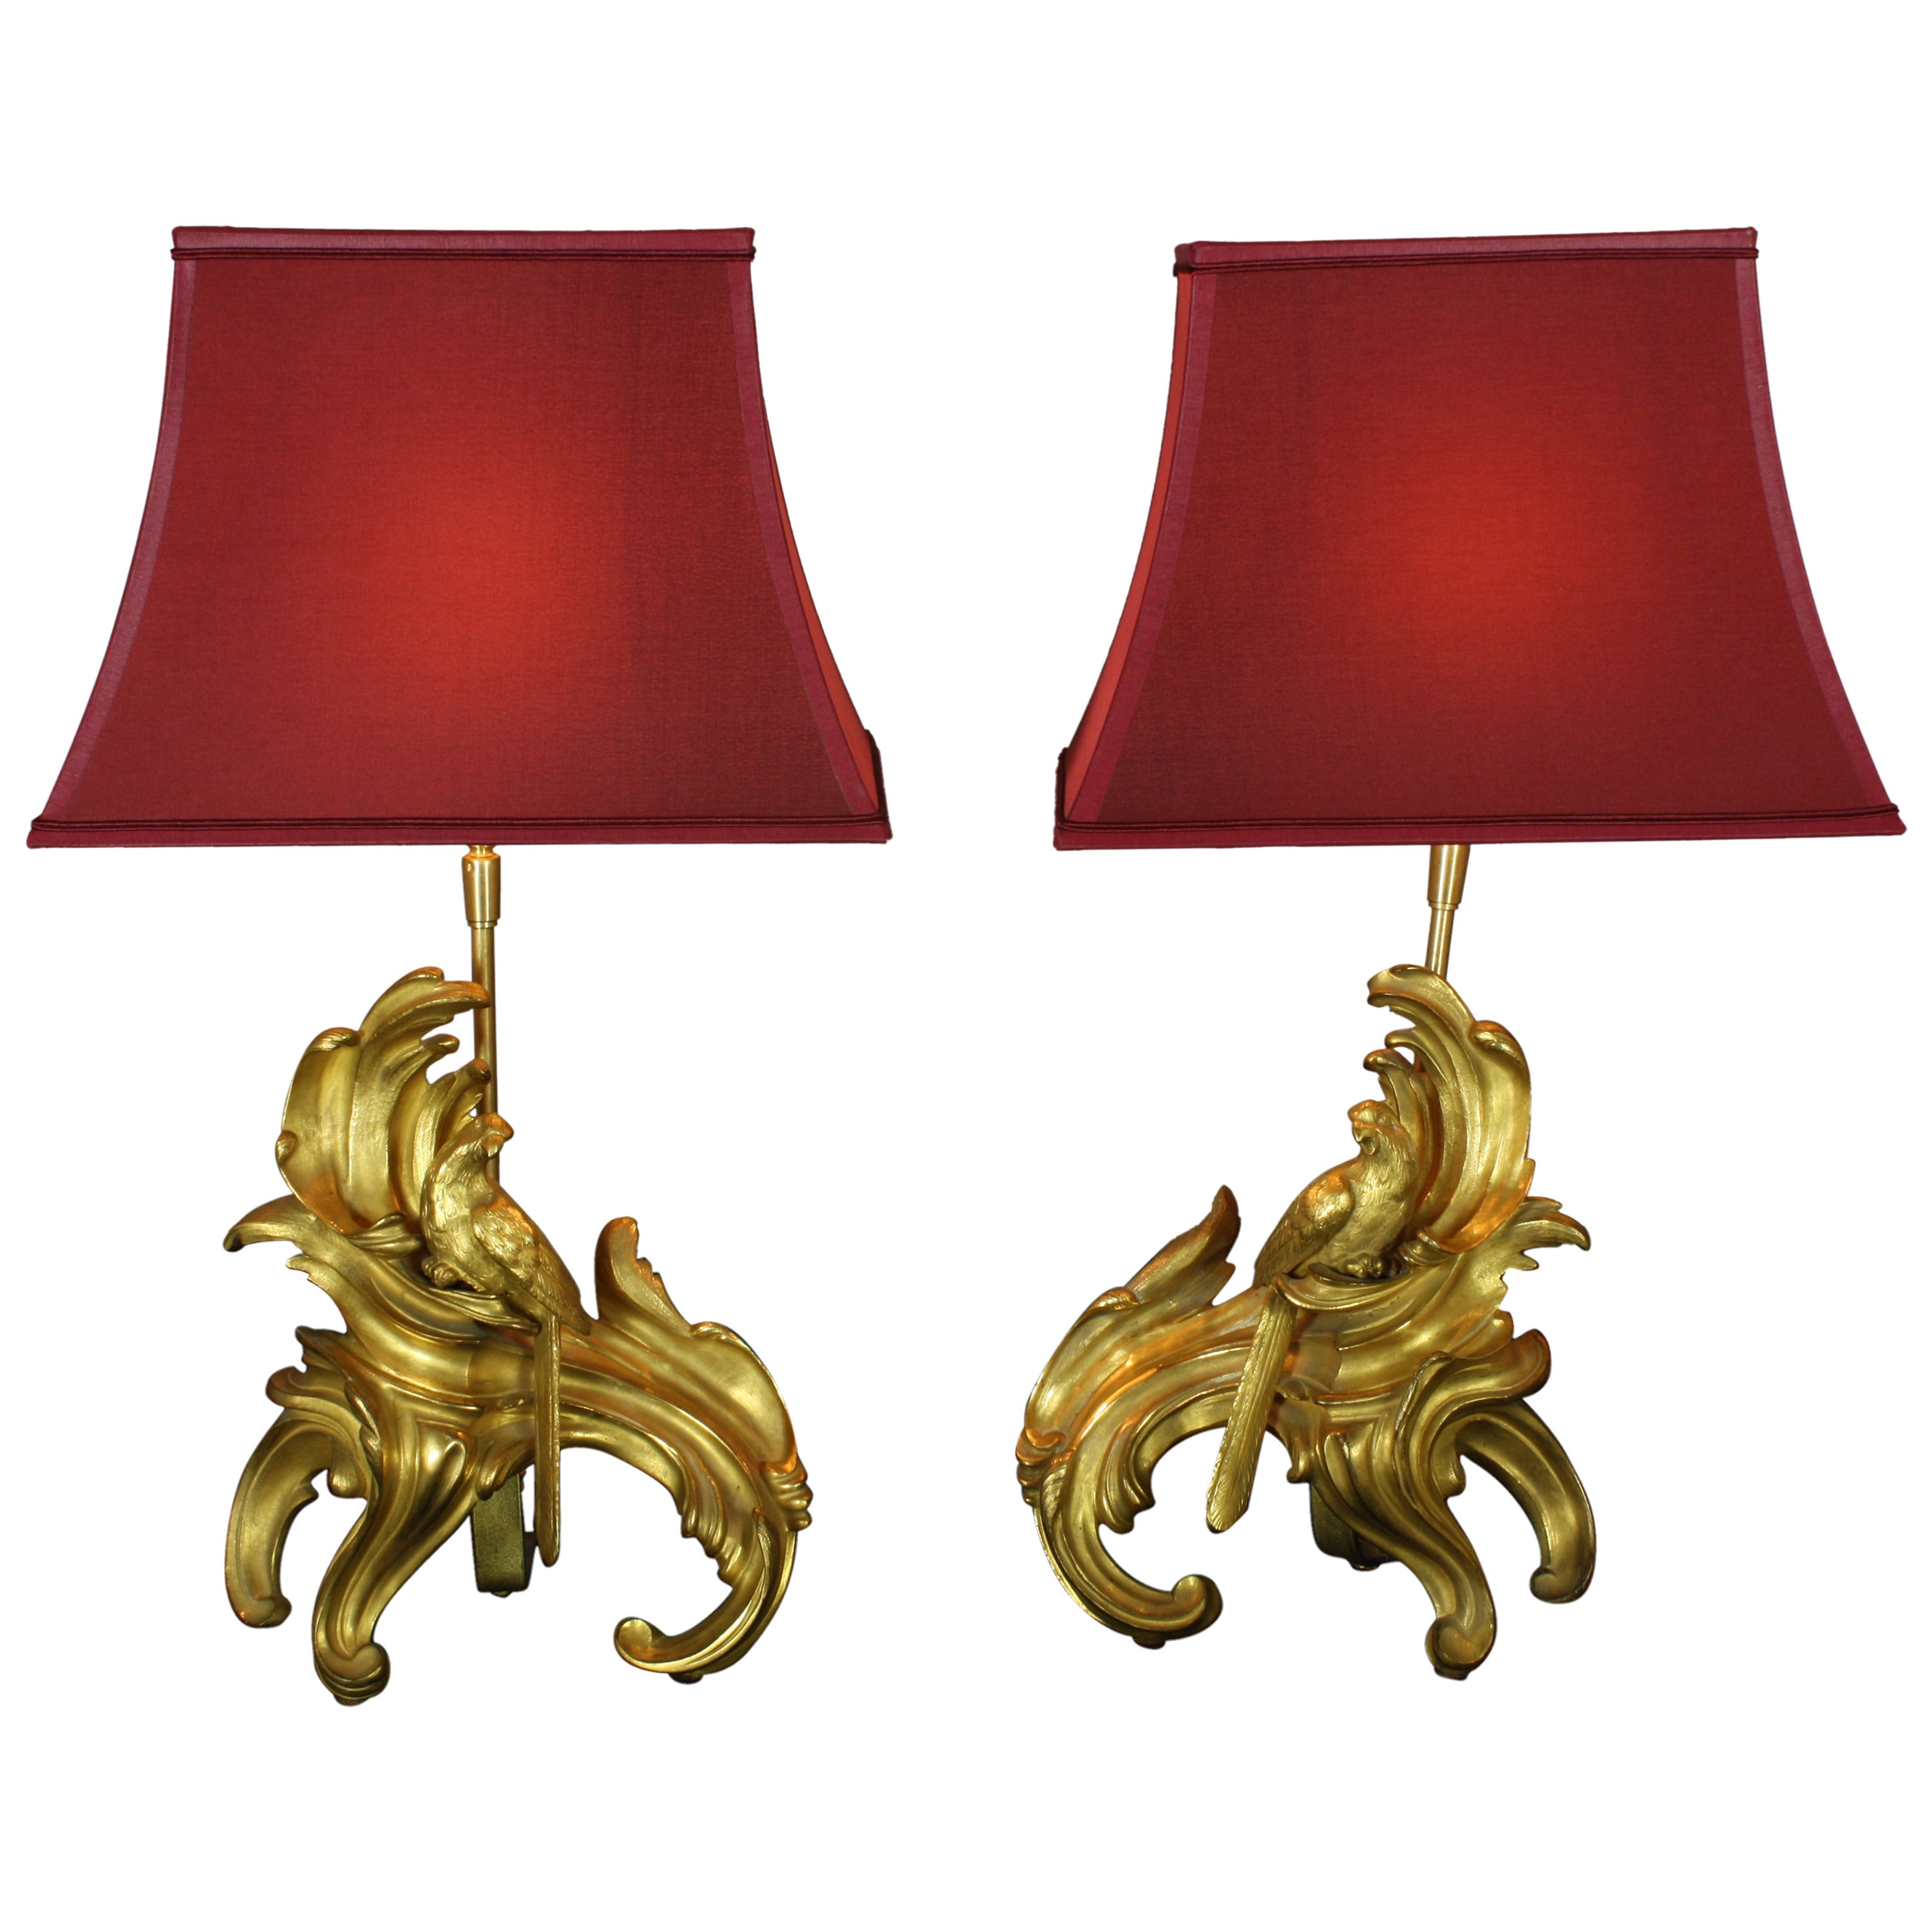 Pair of French Louis XV Style Gilt Bronze Parrot Chenet Lamps For Sale